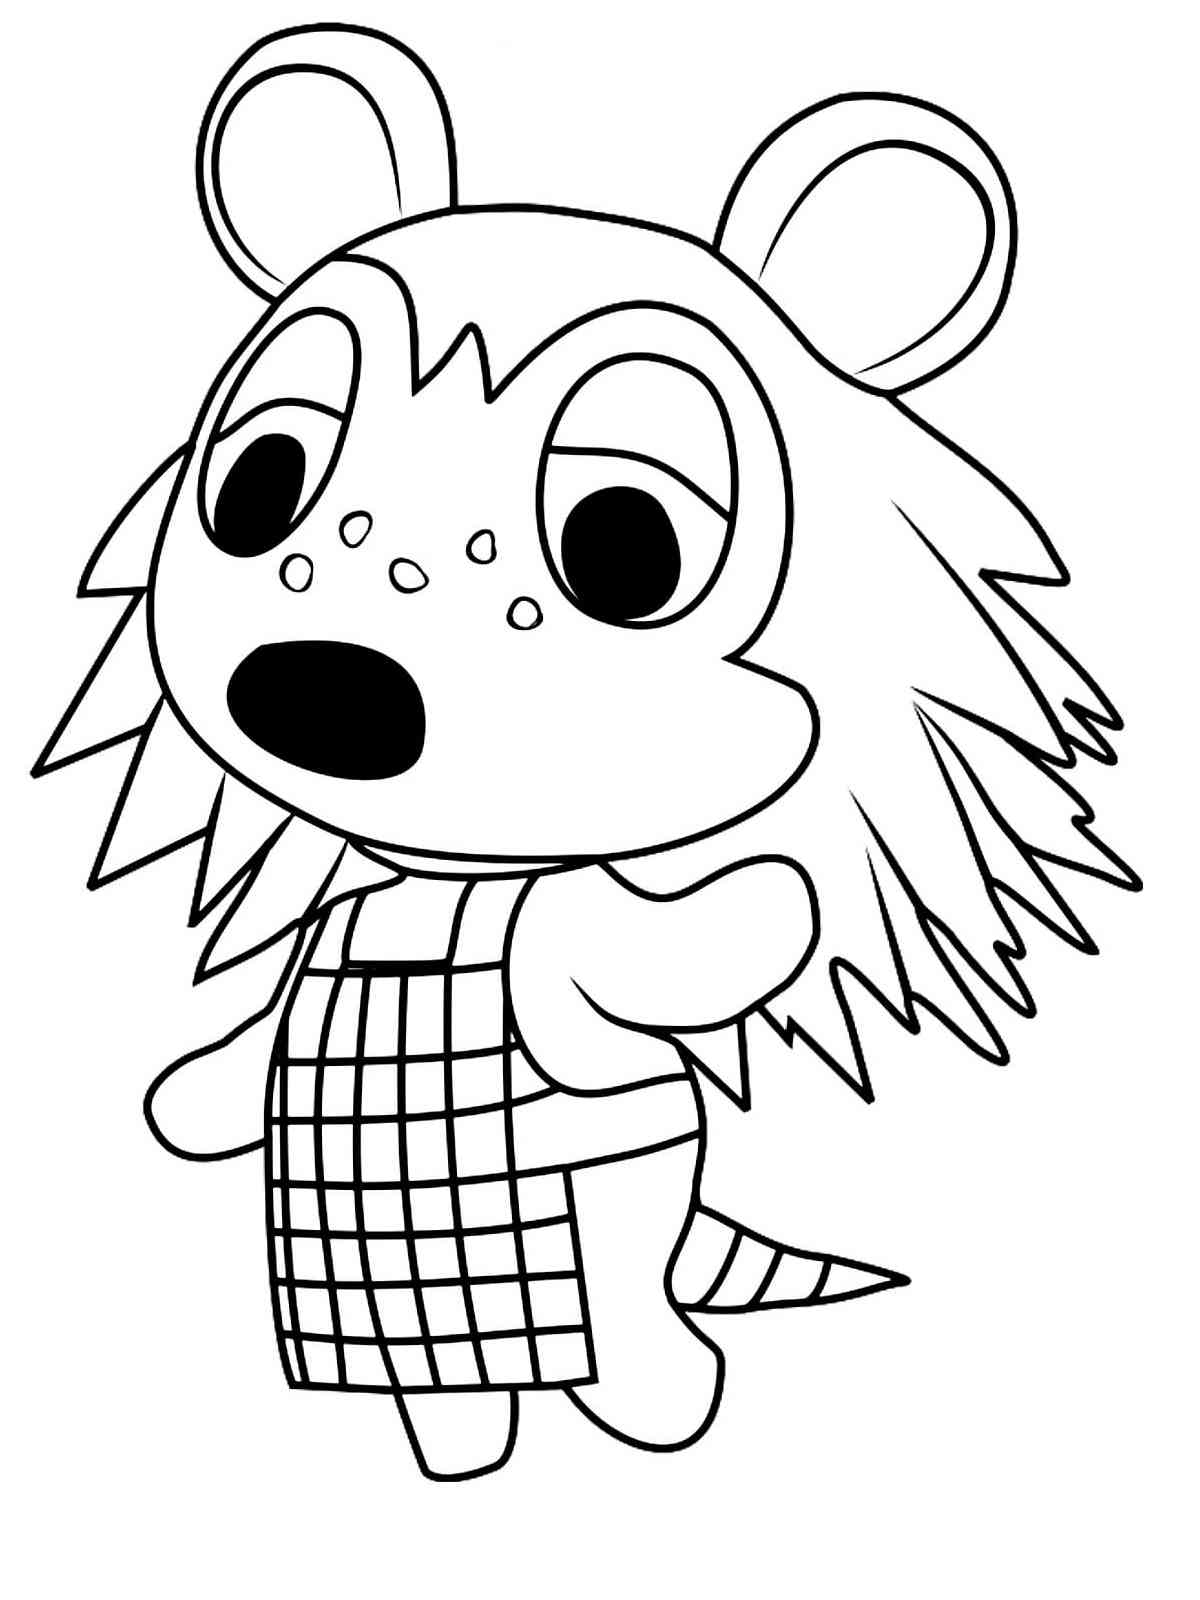 Sable from Animal Crossing coloring page